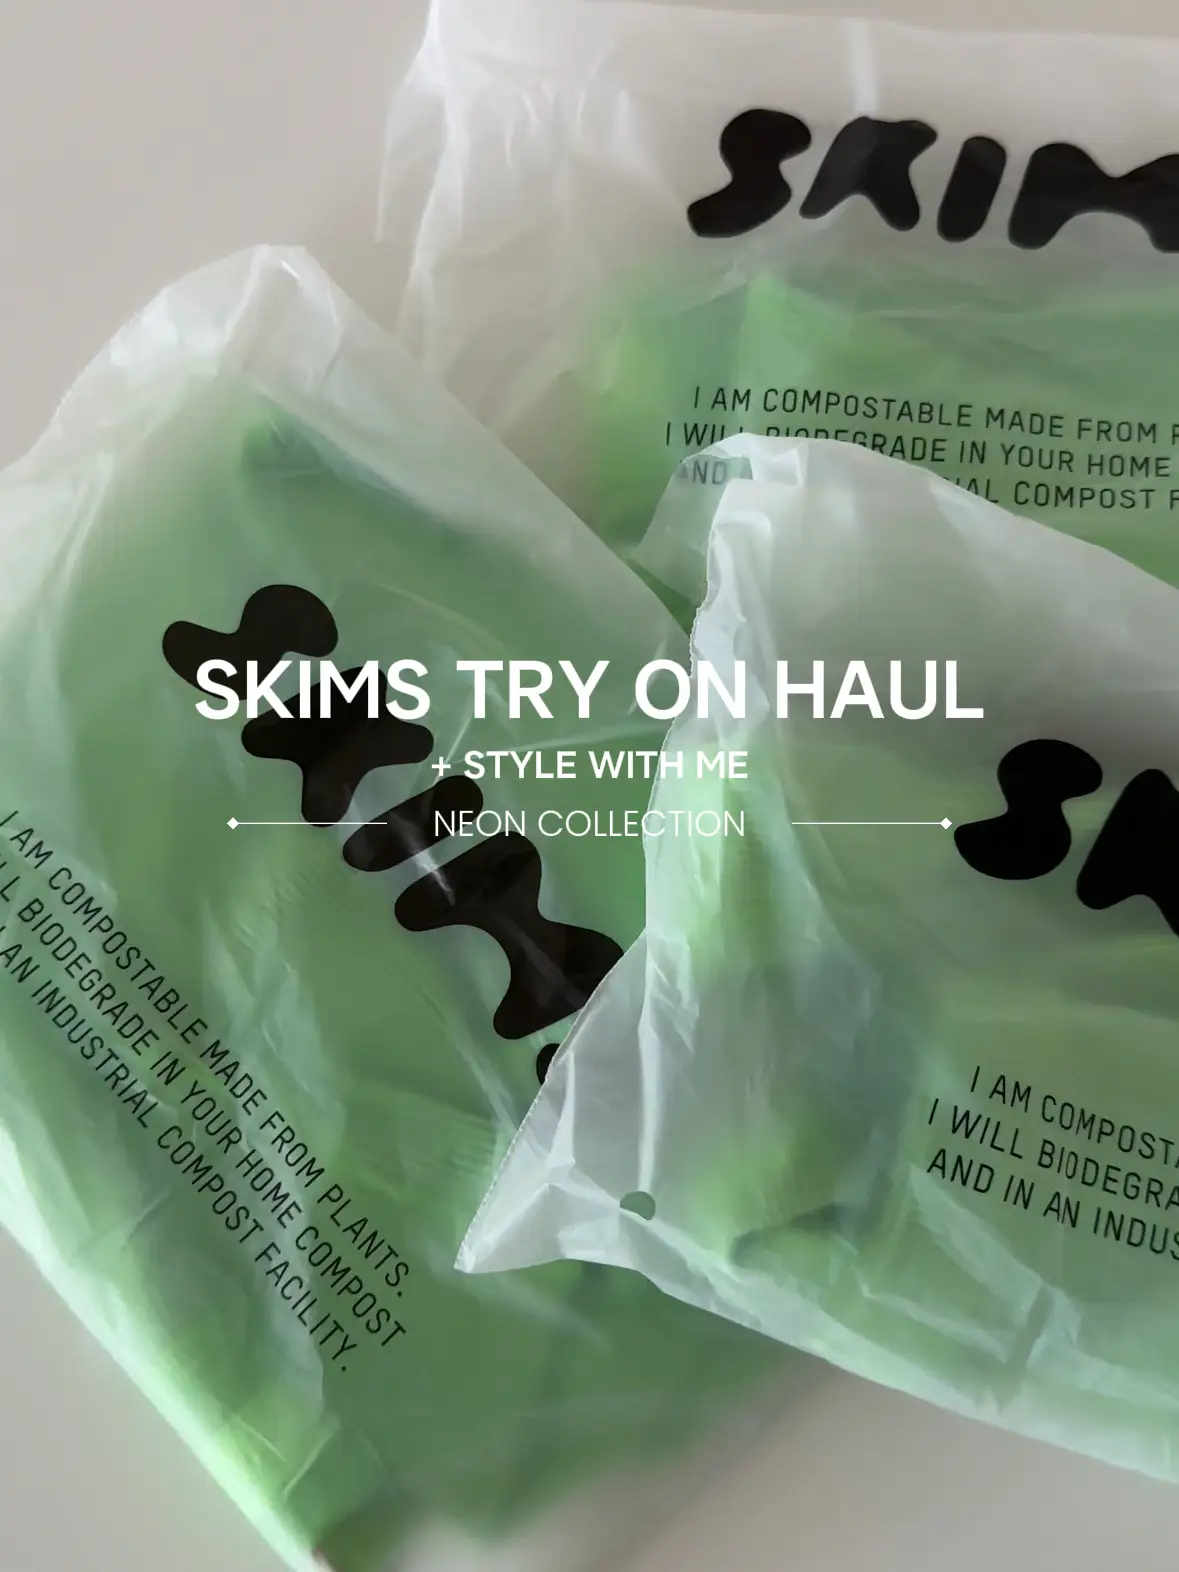 SKIMS TRY ON HAUL, Gallery posted by Devon Lassiter